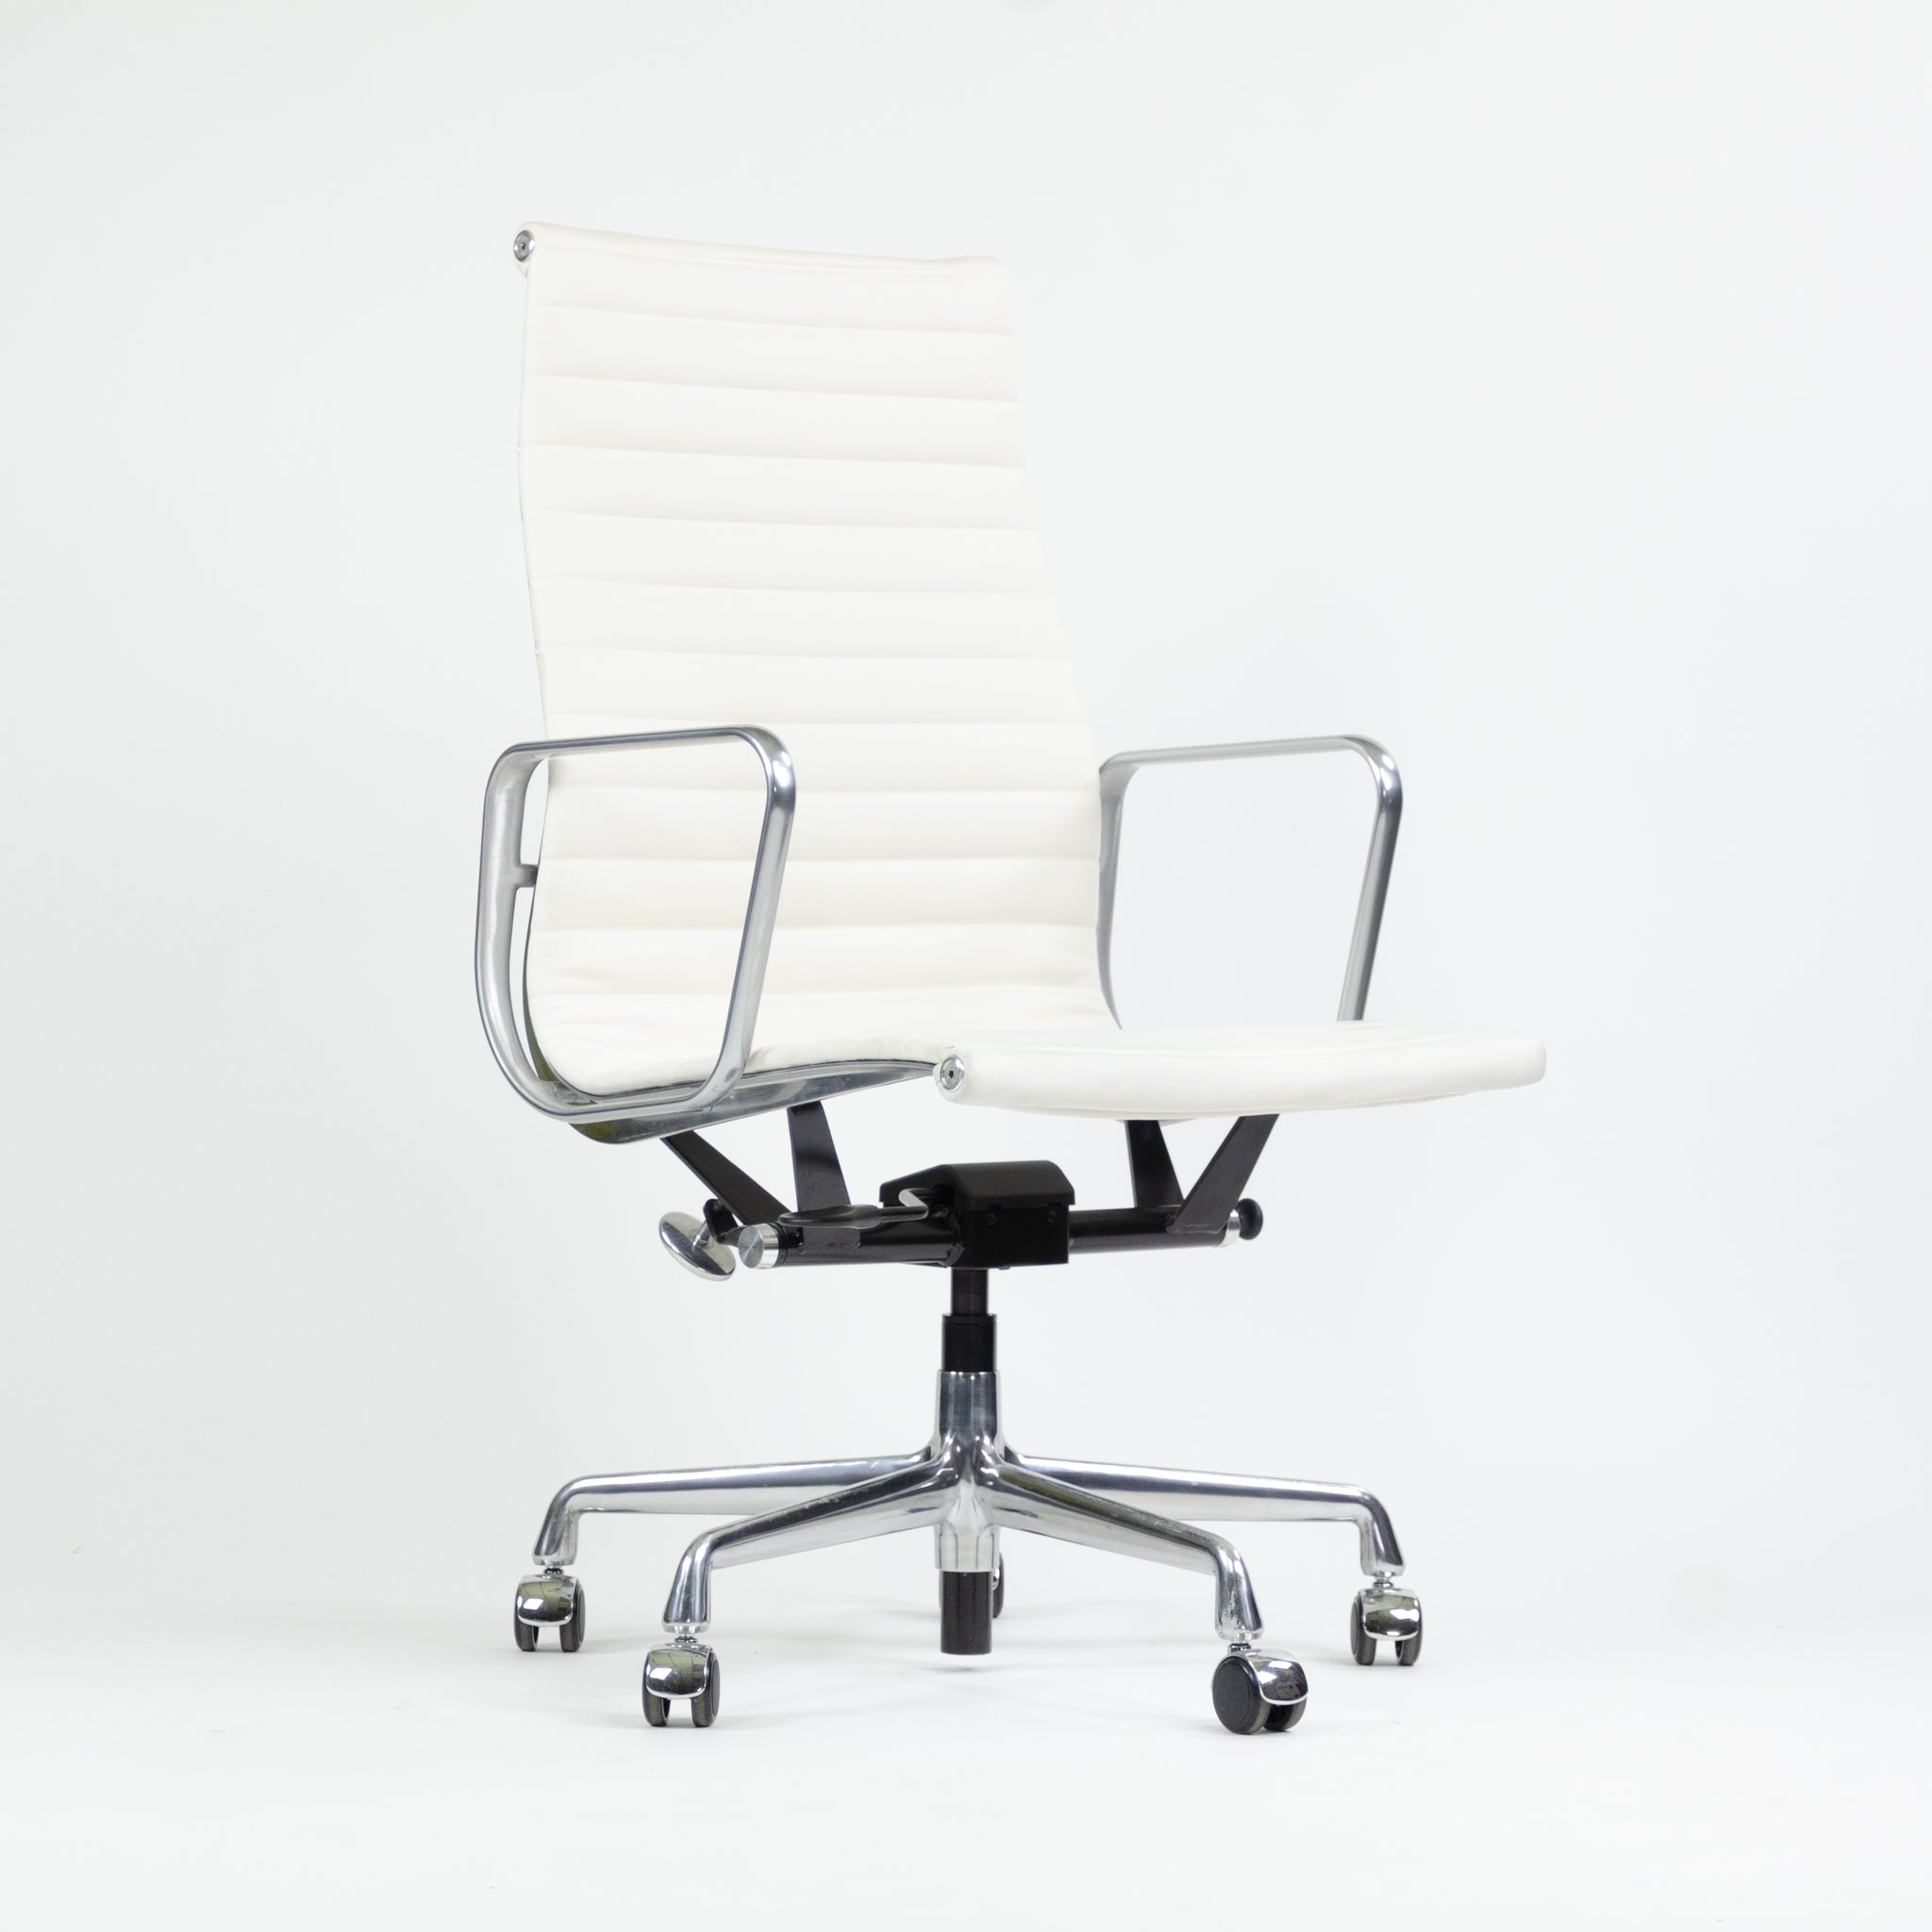 SOLD Eames Herman Miller Leather High Executive Aluminum Group Desk Chair White 2018